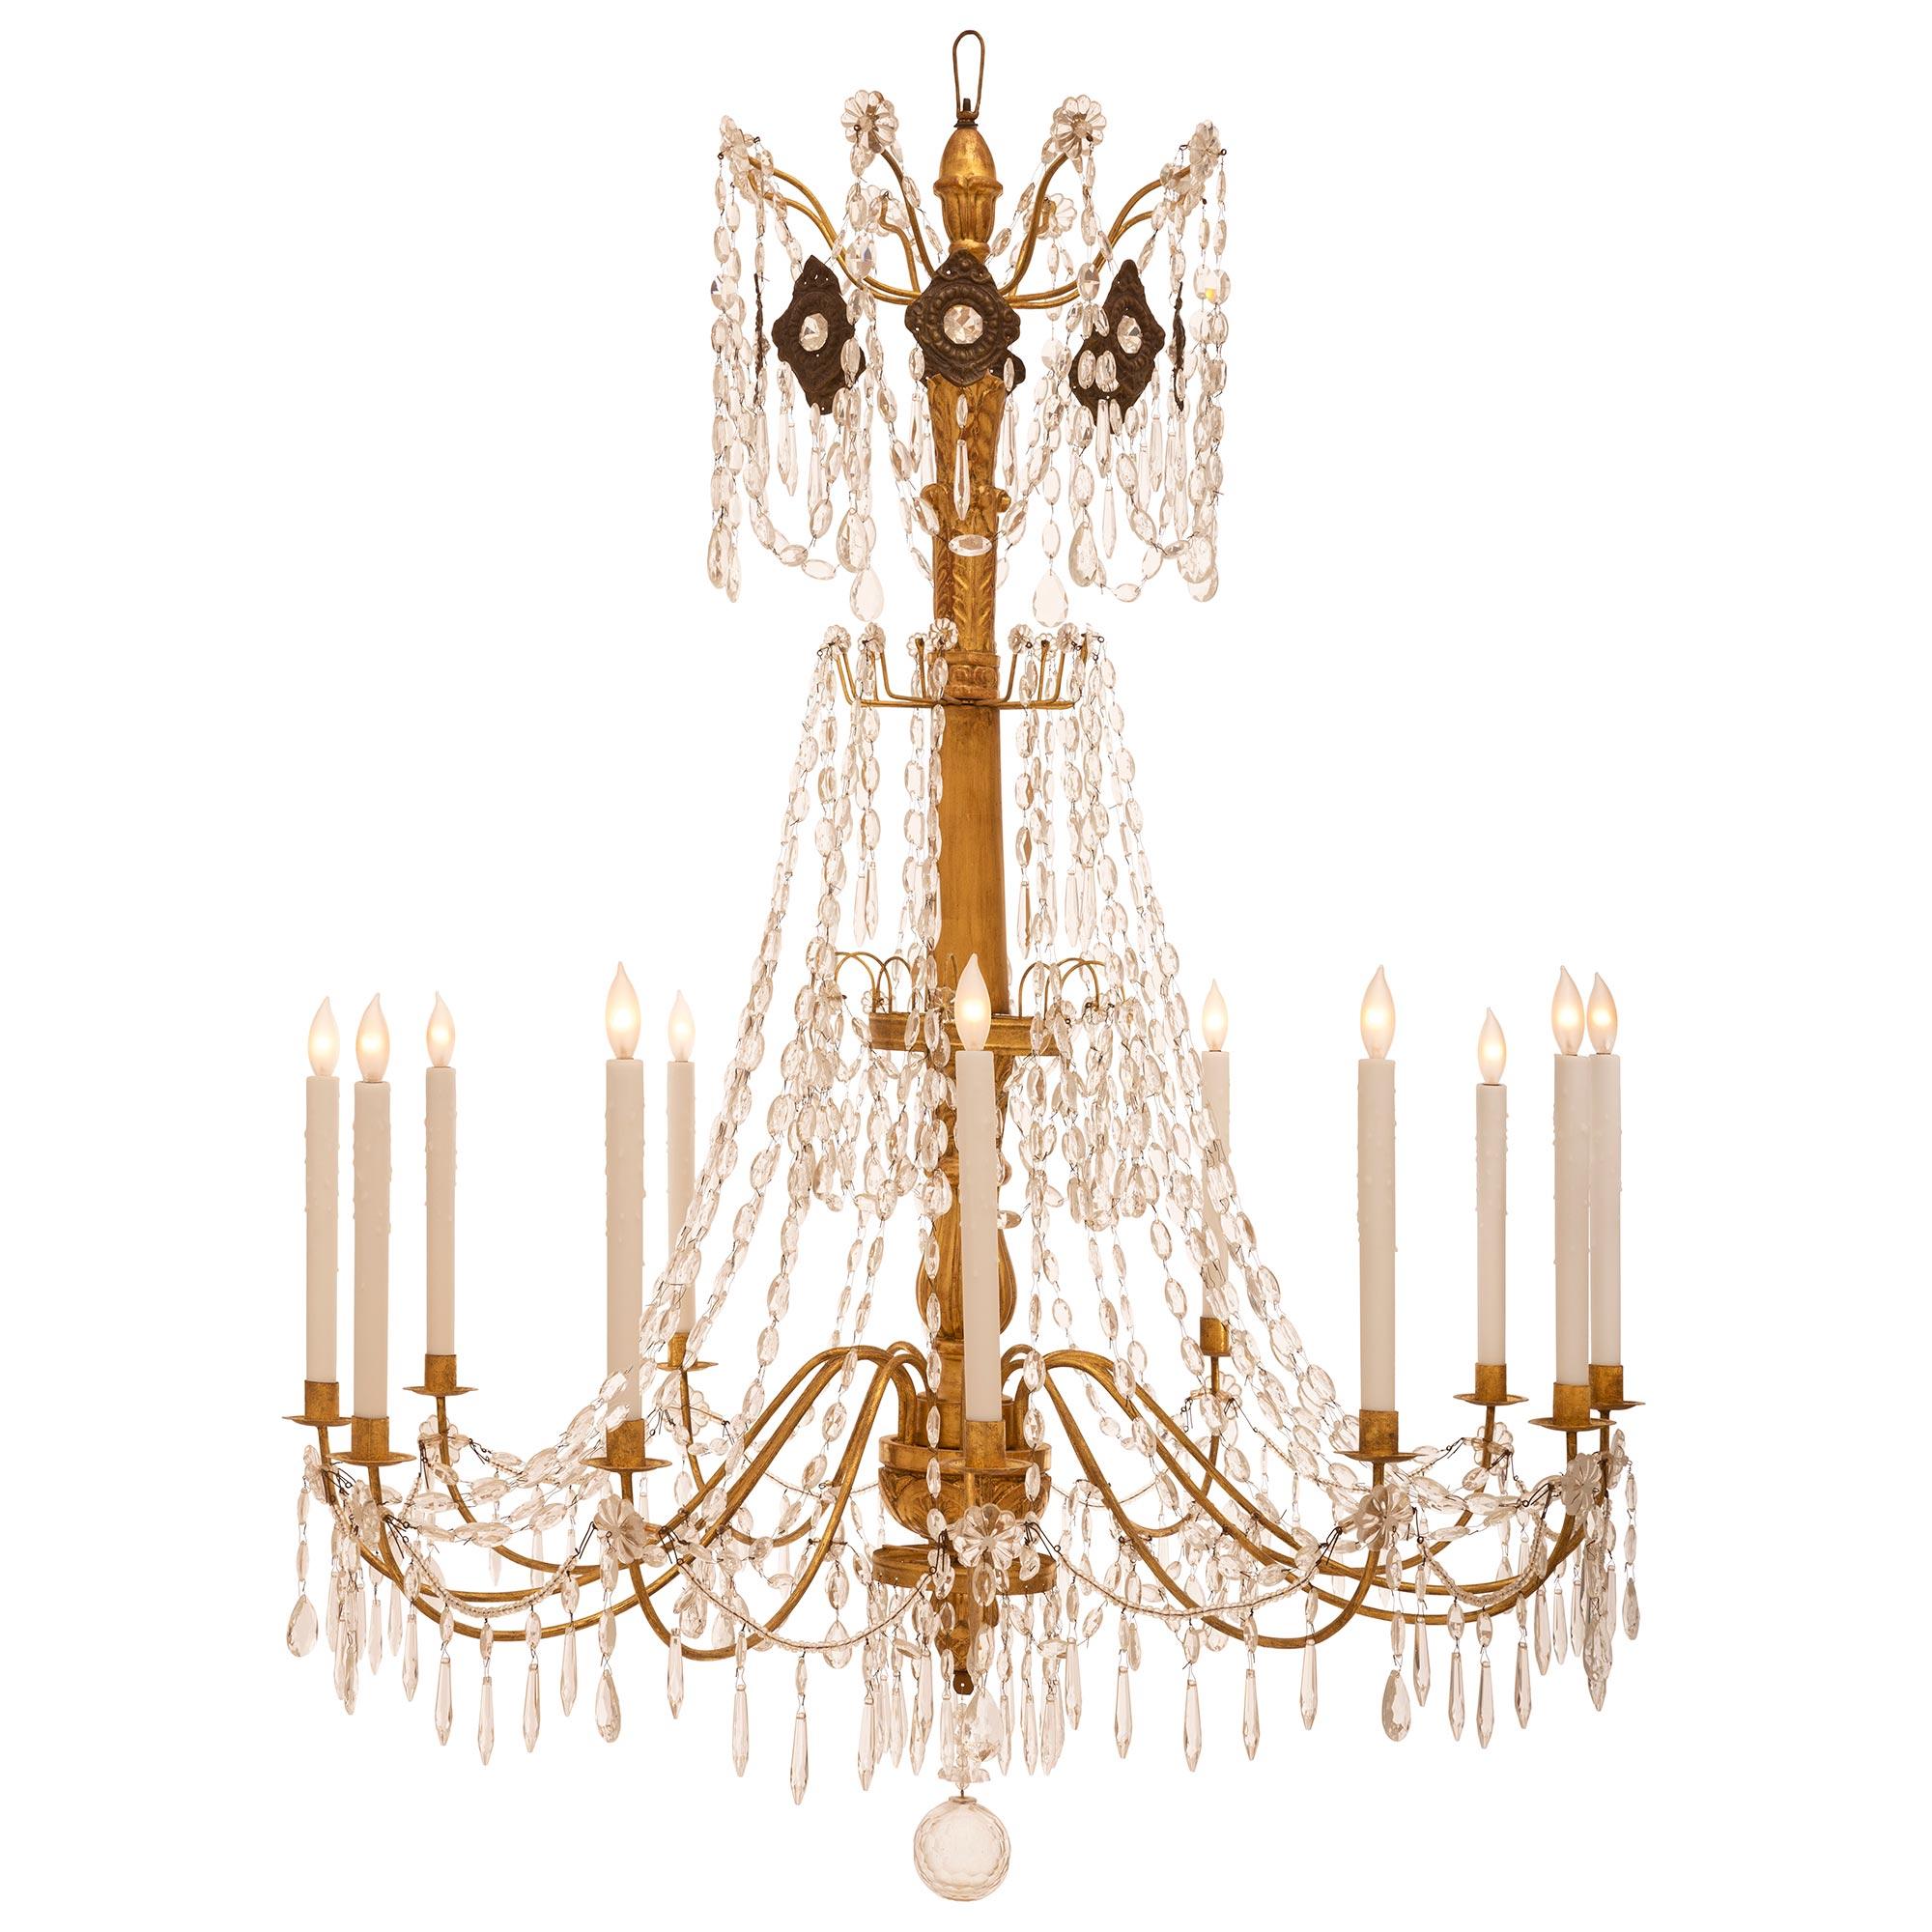 An impressive 19th century Italian giltwood and gold leaf on metal chandelier with crystal and glass garlands. The twelve scrolled gilt metal arms are decorated by crystal drops topped by rosettes and are joined by glass beads accented by crystal